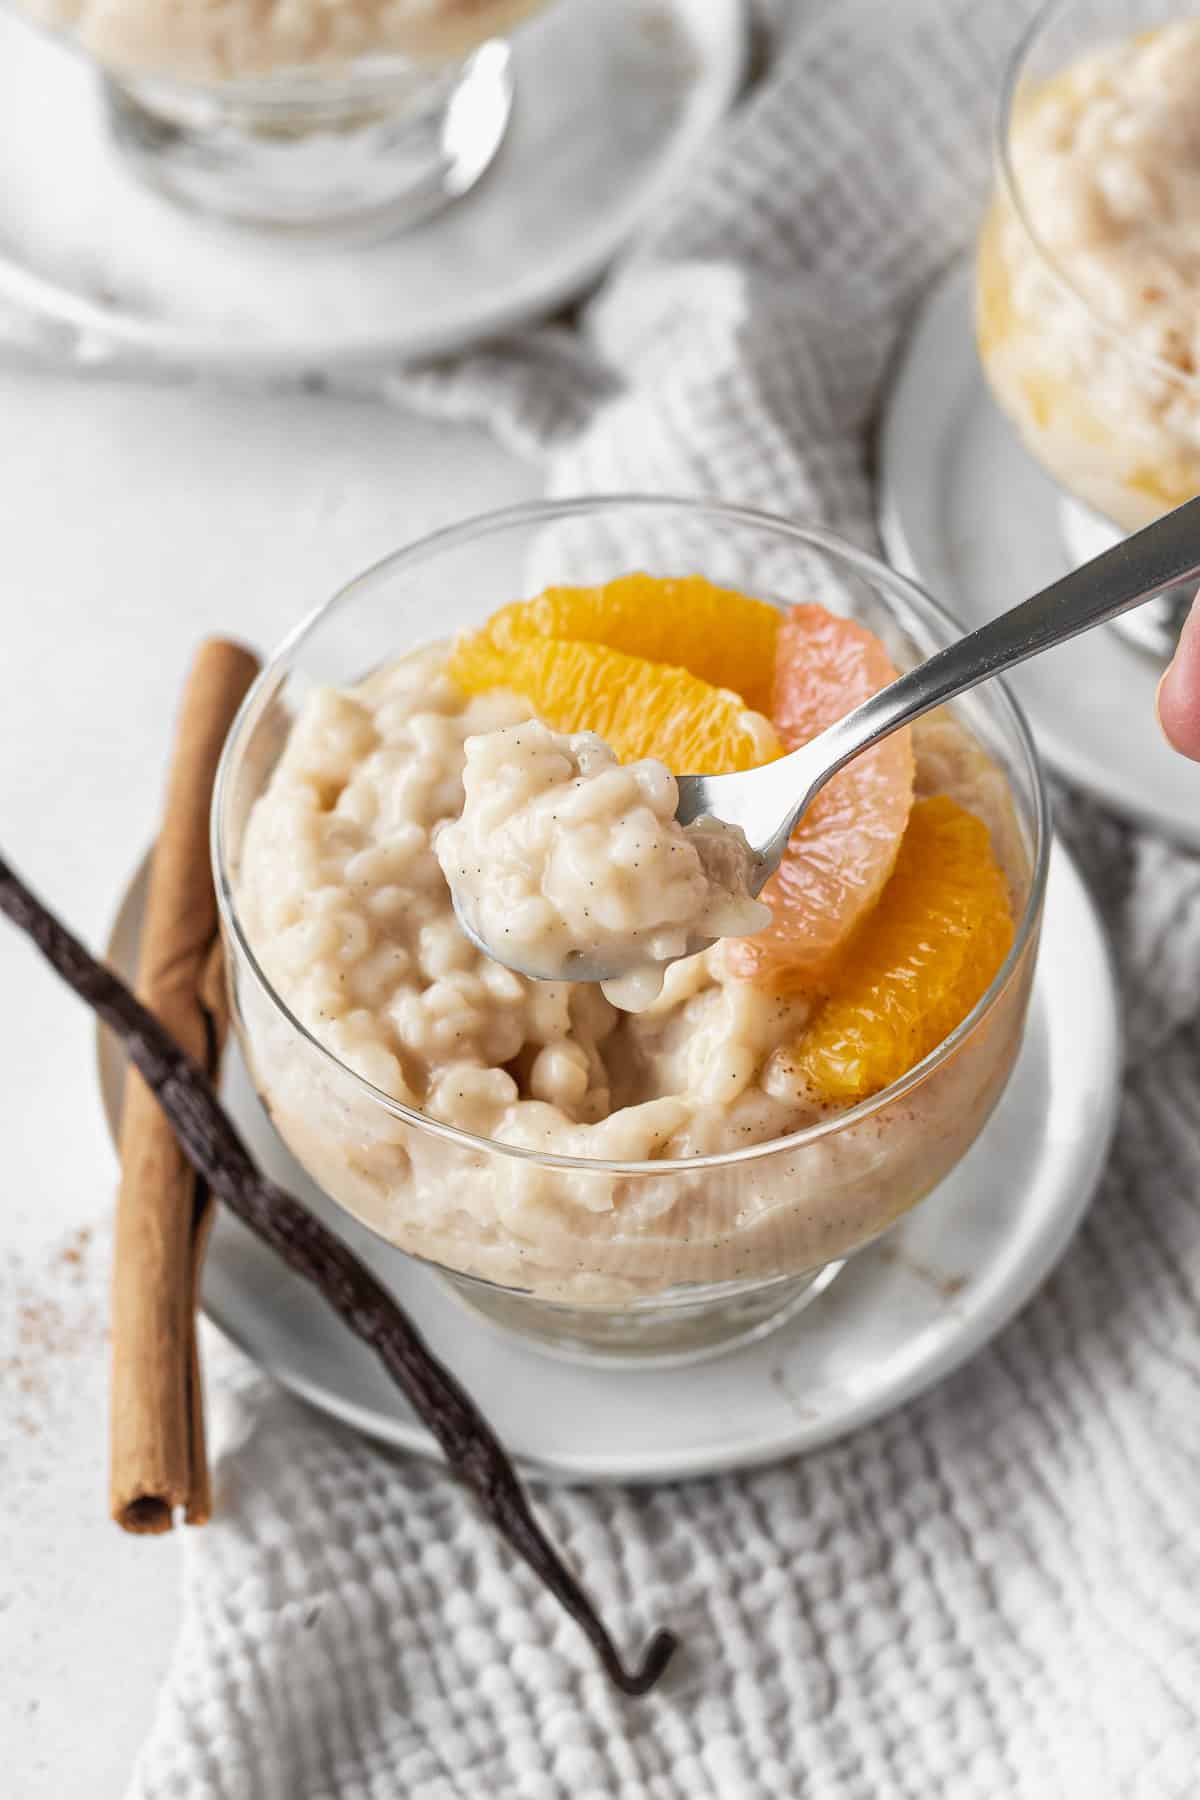 A spoonful of vegan rice pudding over a cup of the pudding.